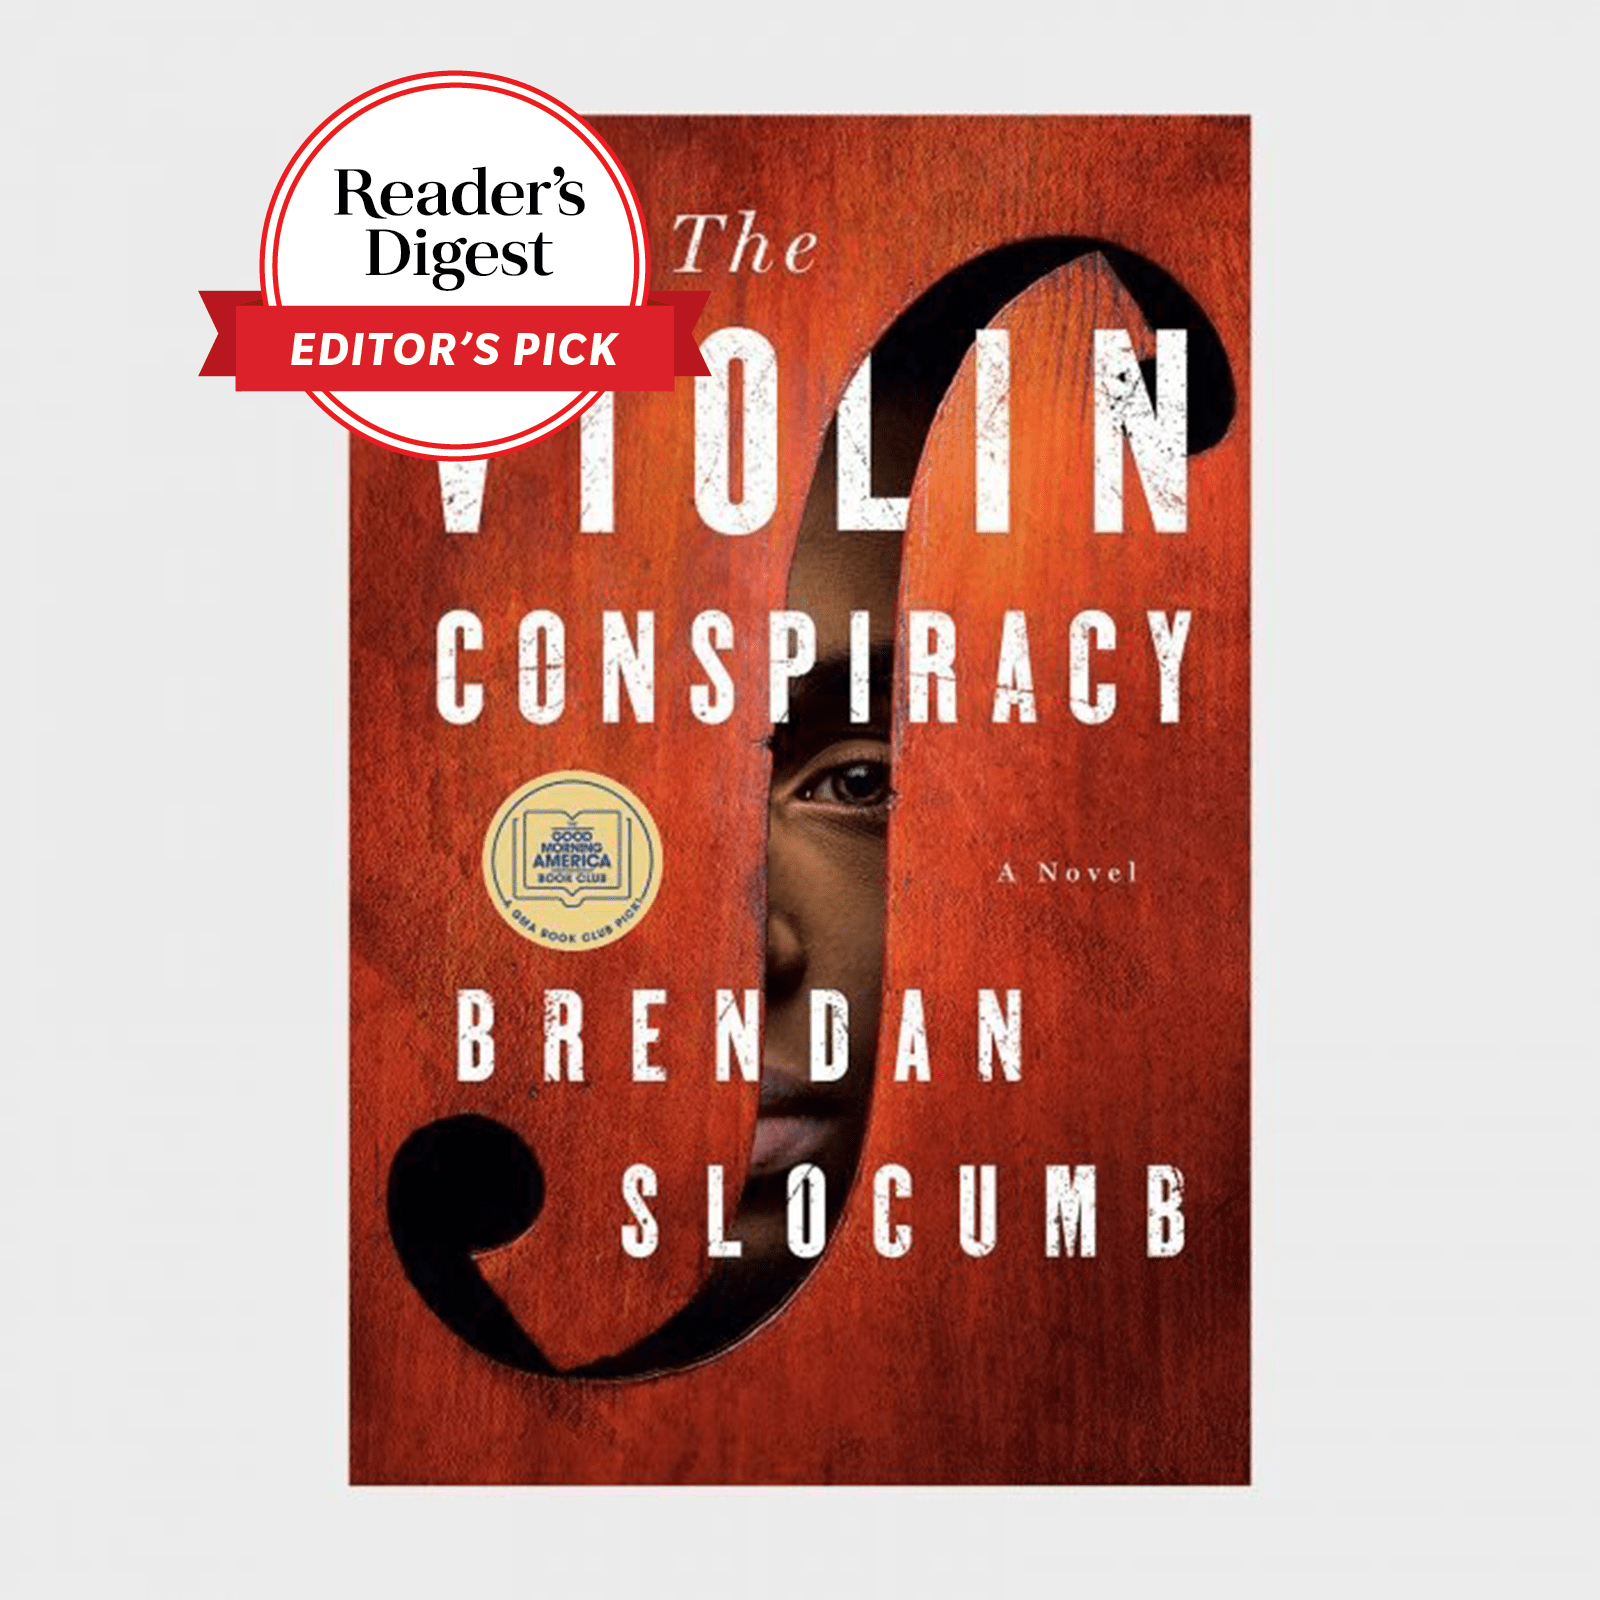 <p class=""><strong>Release date:</strong> Feb. 1, 2022</p> <p>Here's another crime-fueled page-turner for you! But Brendan Slocumb's <a href="https://www.amazon.com/Violin-Conspiracy-Brendan-Slocumb/dp/0593315413/" rel="noopener noreferrer"><em>The Violin Conspiracy</em></a> is far from a formulaic mystery. It's the story of Ray, a Black violinist whose love of music finally blossoms after discovering that his great-great-grandfather's old fiddle is a world-renowned violin. But when the priceless heirloom is stolen from him just before a major performance, the musician must race to trace a random note and recover his life's work. One of the best fiction books of 2022, <em>The Violin Conspiracy</em> is set to take its genre to the next level. It's a literary thriller rife with themes of art, history, <a href="https://www.rd.com/list/essential-books-about-race-relations-in-america/" rel="noopener noreferrer">racism</a> and overcoming adversity.</p> <p class="listicle-page__cta-button-shop"><a class="shop-btn" href="https://www.amazon.com/Violin-Conspiracy-Brendan-Slocumb/dp/0593315413/">Shop Now</a></p>